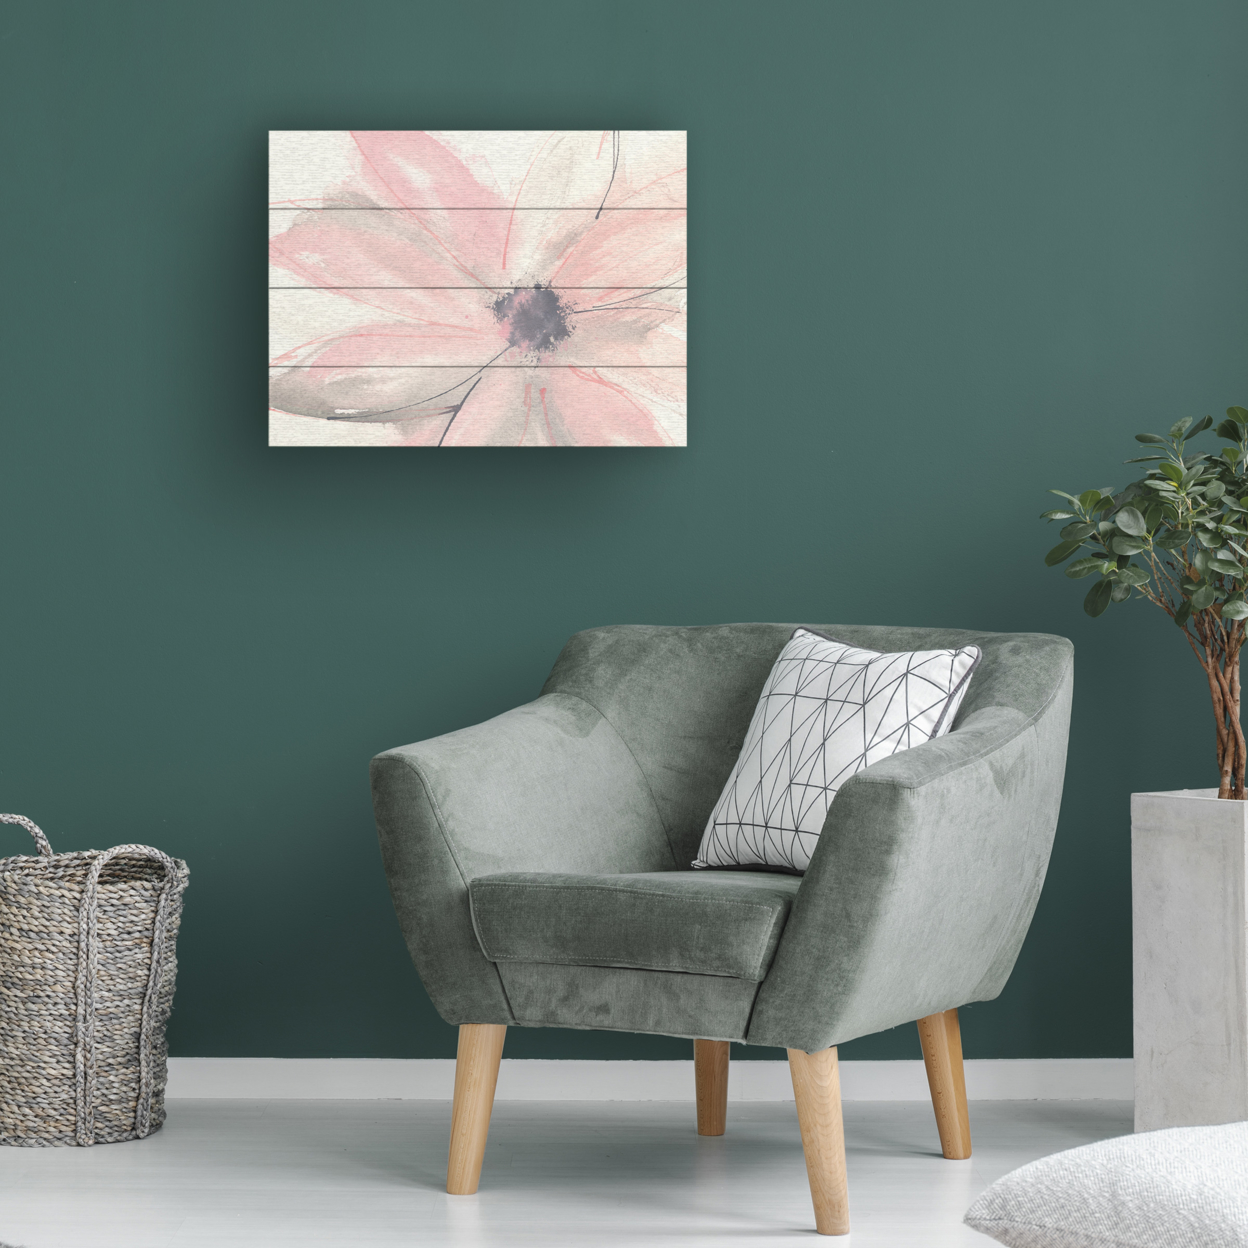 Wall Art 12 X 16 Inches Titled Blush Clematis I Ready To Hang Printed On Wooden Planks